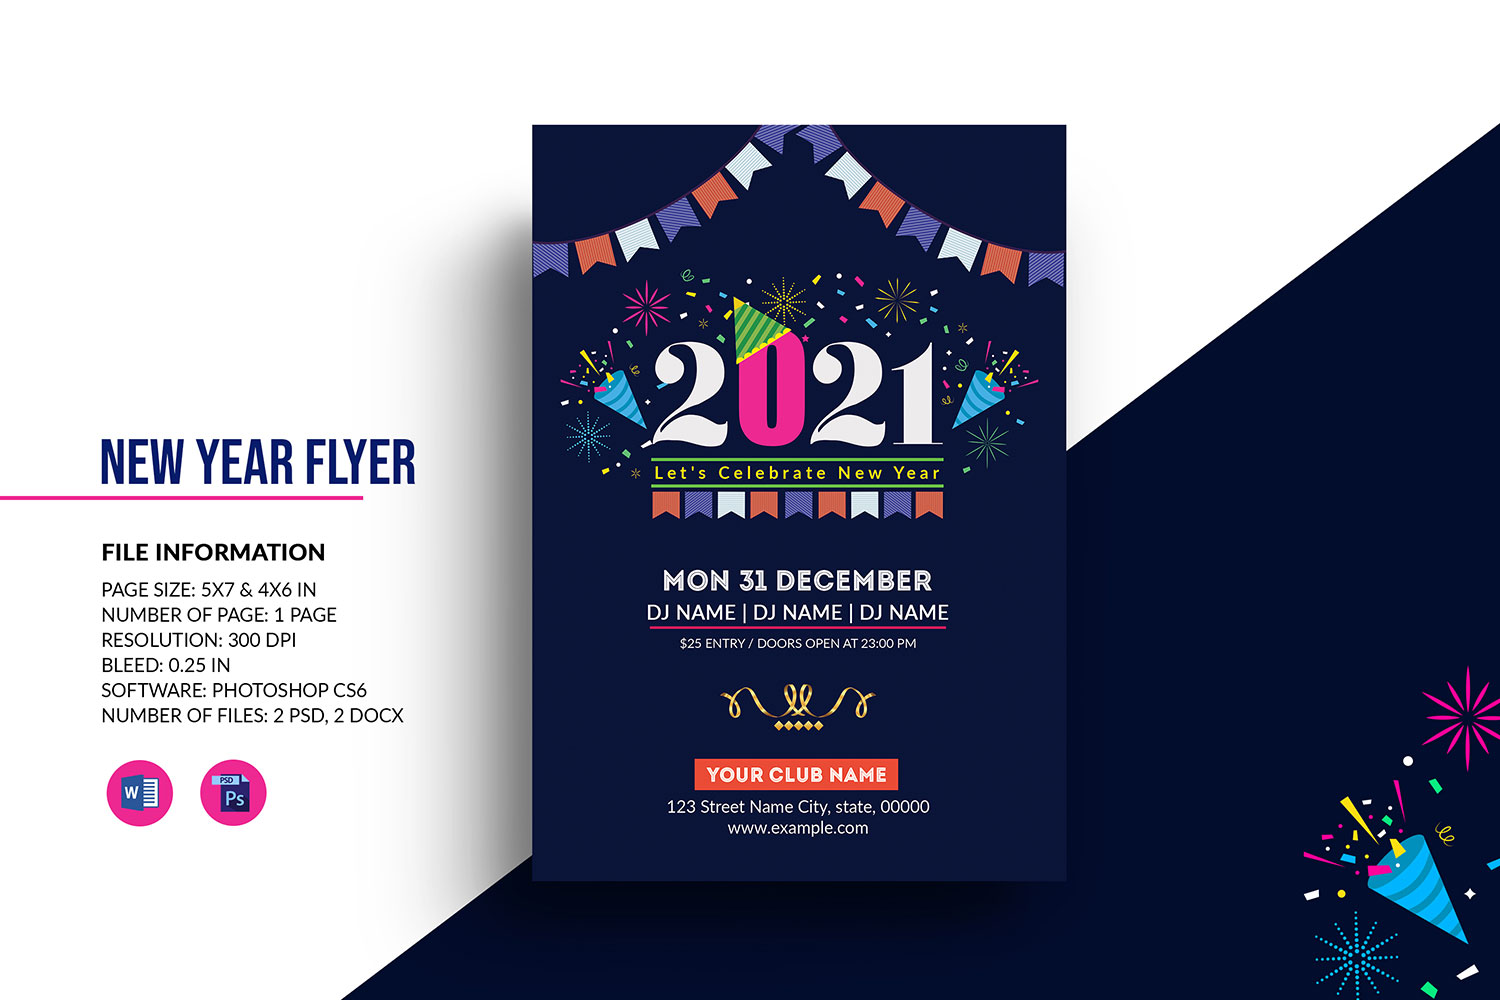 Printable New Year Party Invitation Template. word and Psd